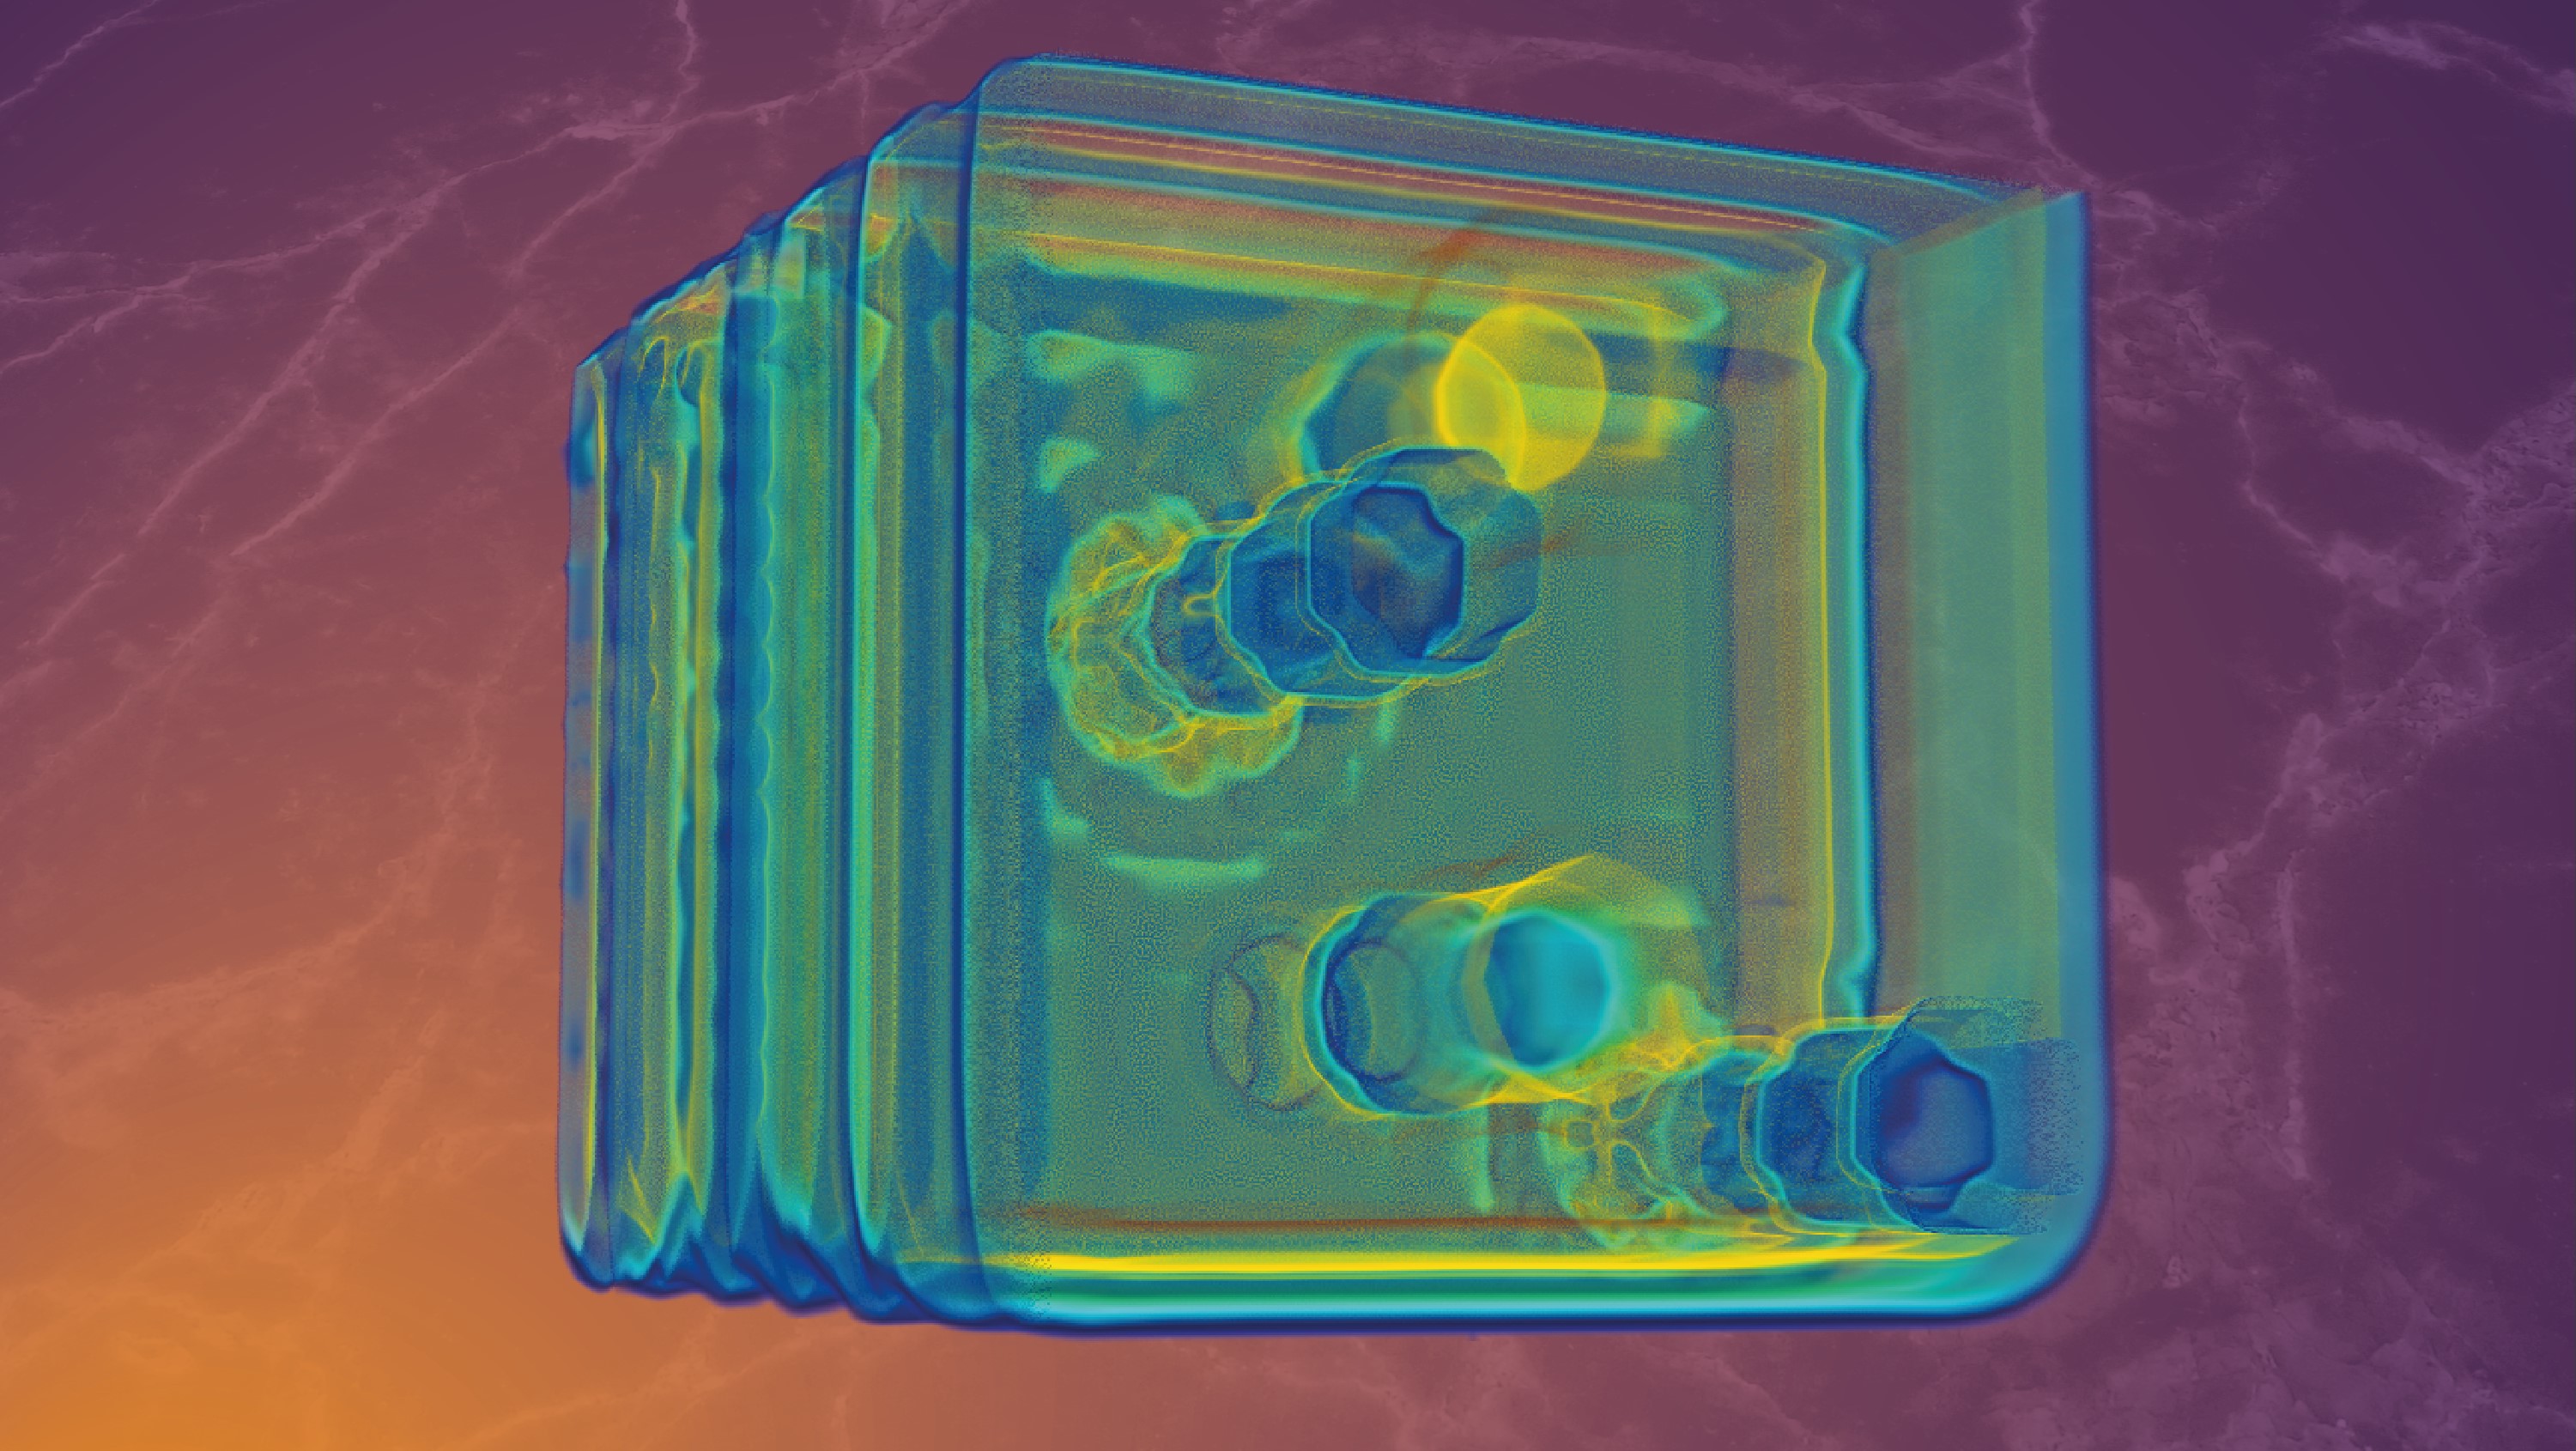 Microscopic, metallic objects distributed throughout a 3D cube